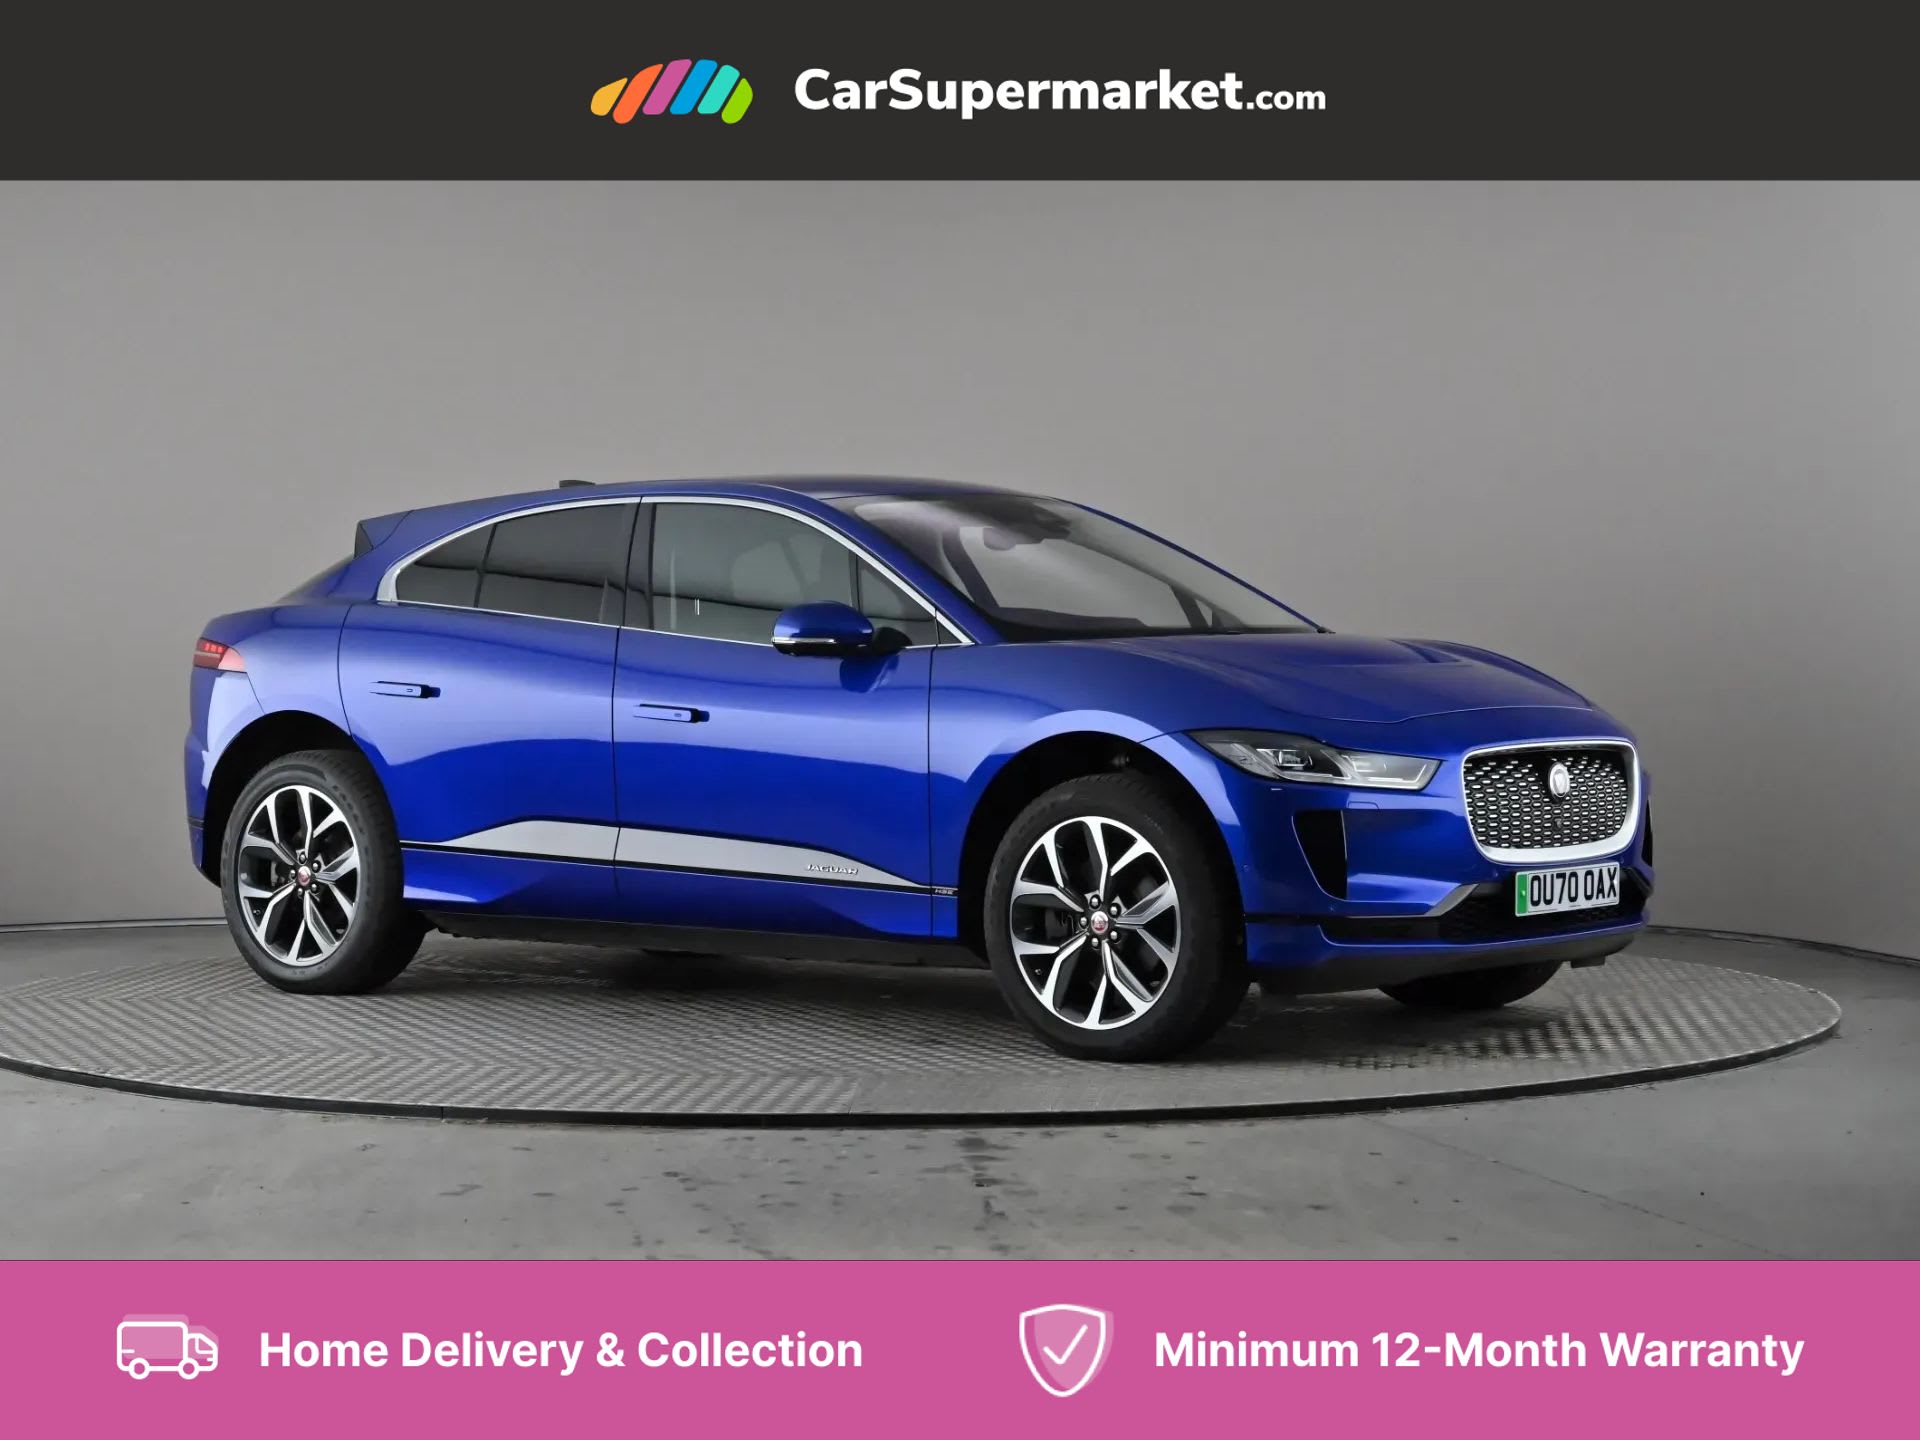 2020 used Jaguar I-PACE 294kW EV400 HSE 90kWh Auto [11kW Charger]